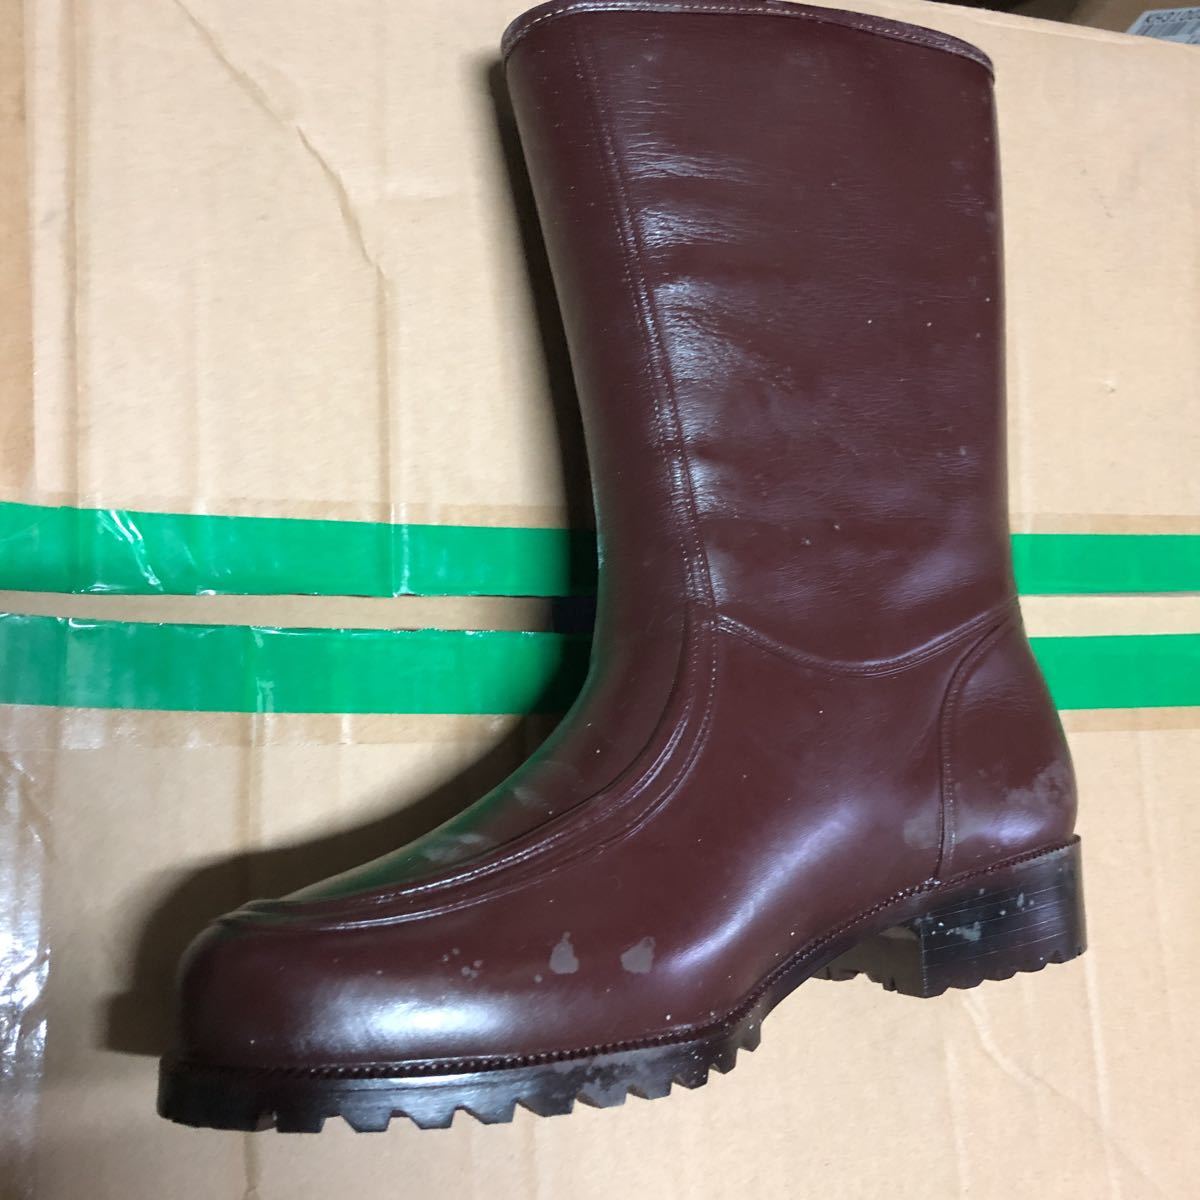  protection against cold boots Asahi product pi Rene -M142BU Brown 26cm 2000 jpy 